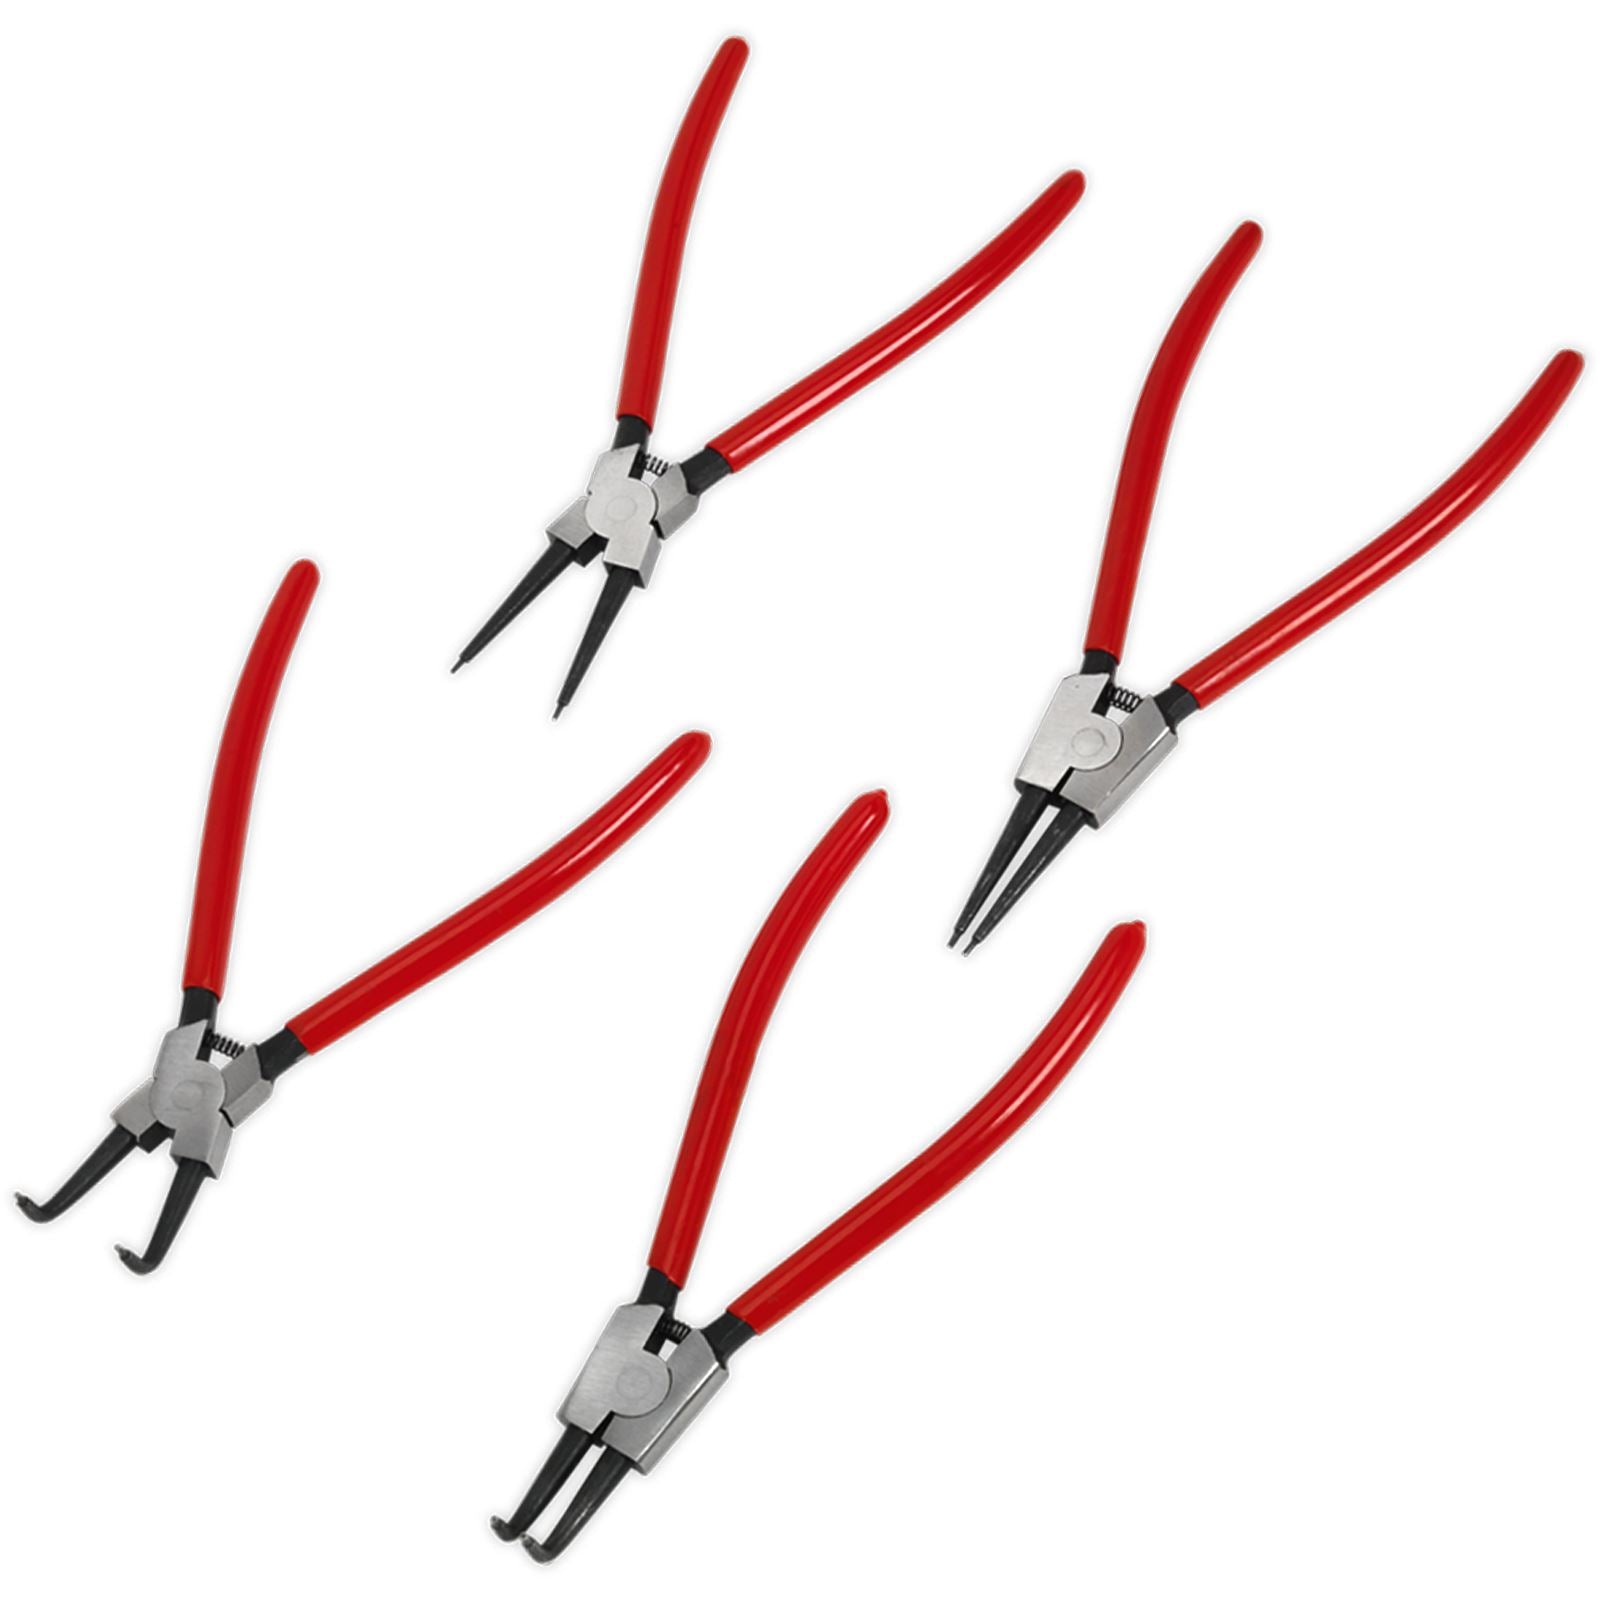 Sealey Premier 4 Piece 230mm Circlip Pliers Set in Storage Hanging Pouch Bent Nose Straight